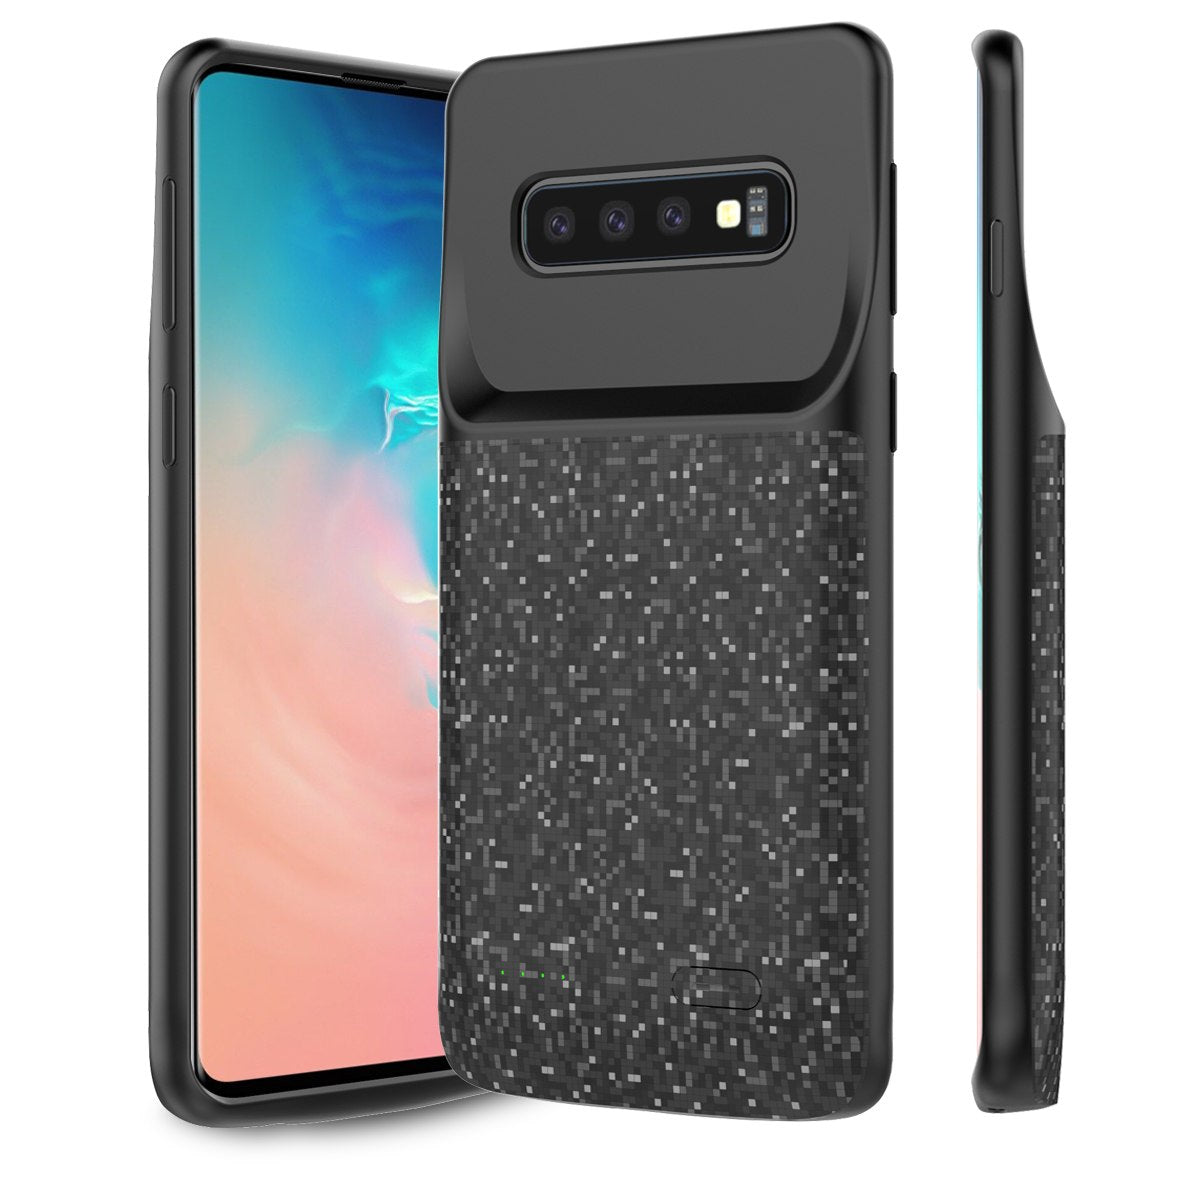 Samsung Galaxy S10 Plus /  S10 E / S10 Battery Charger Case Cover - Perfenq